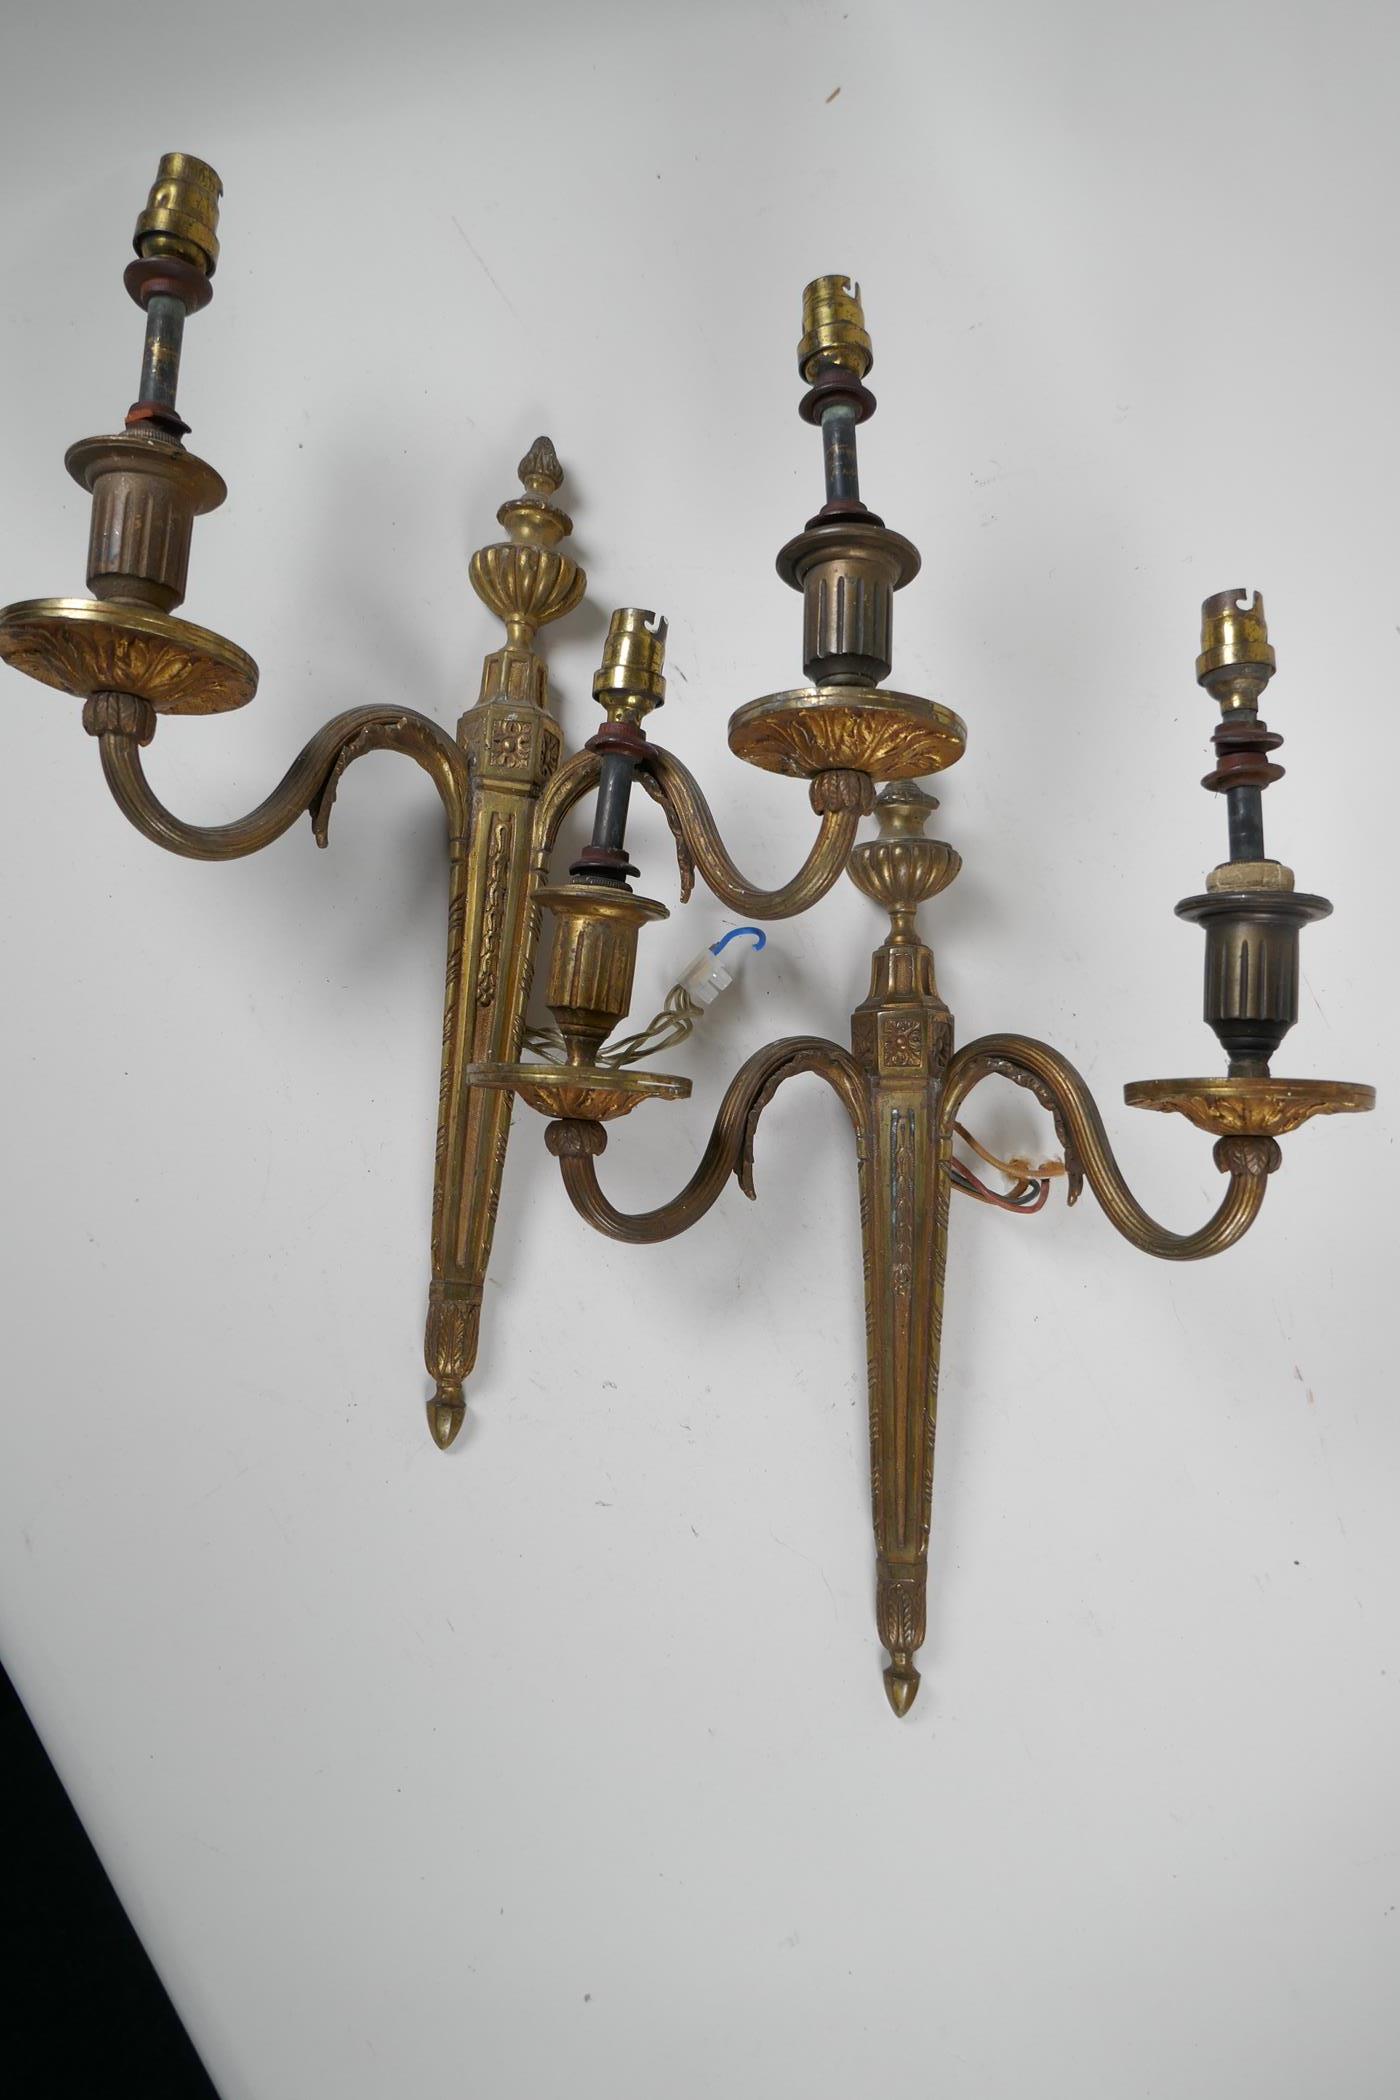 A pair of brass two light wall sconces in the neoclassical style, 13½" high